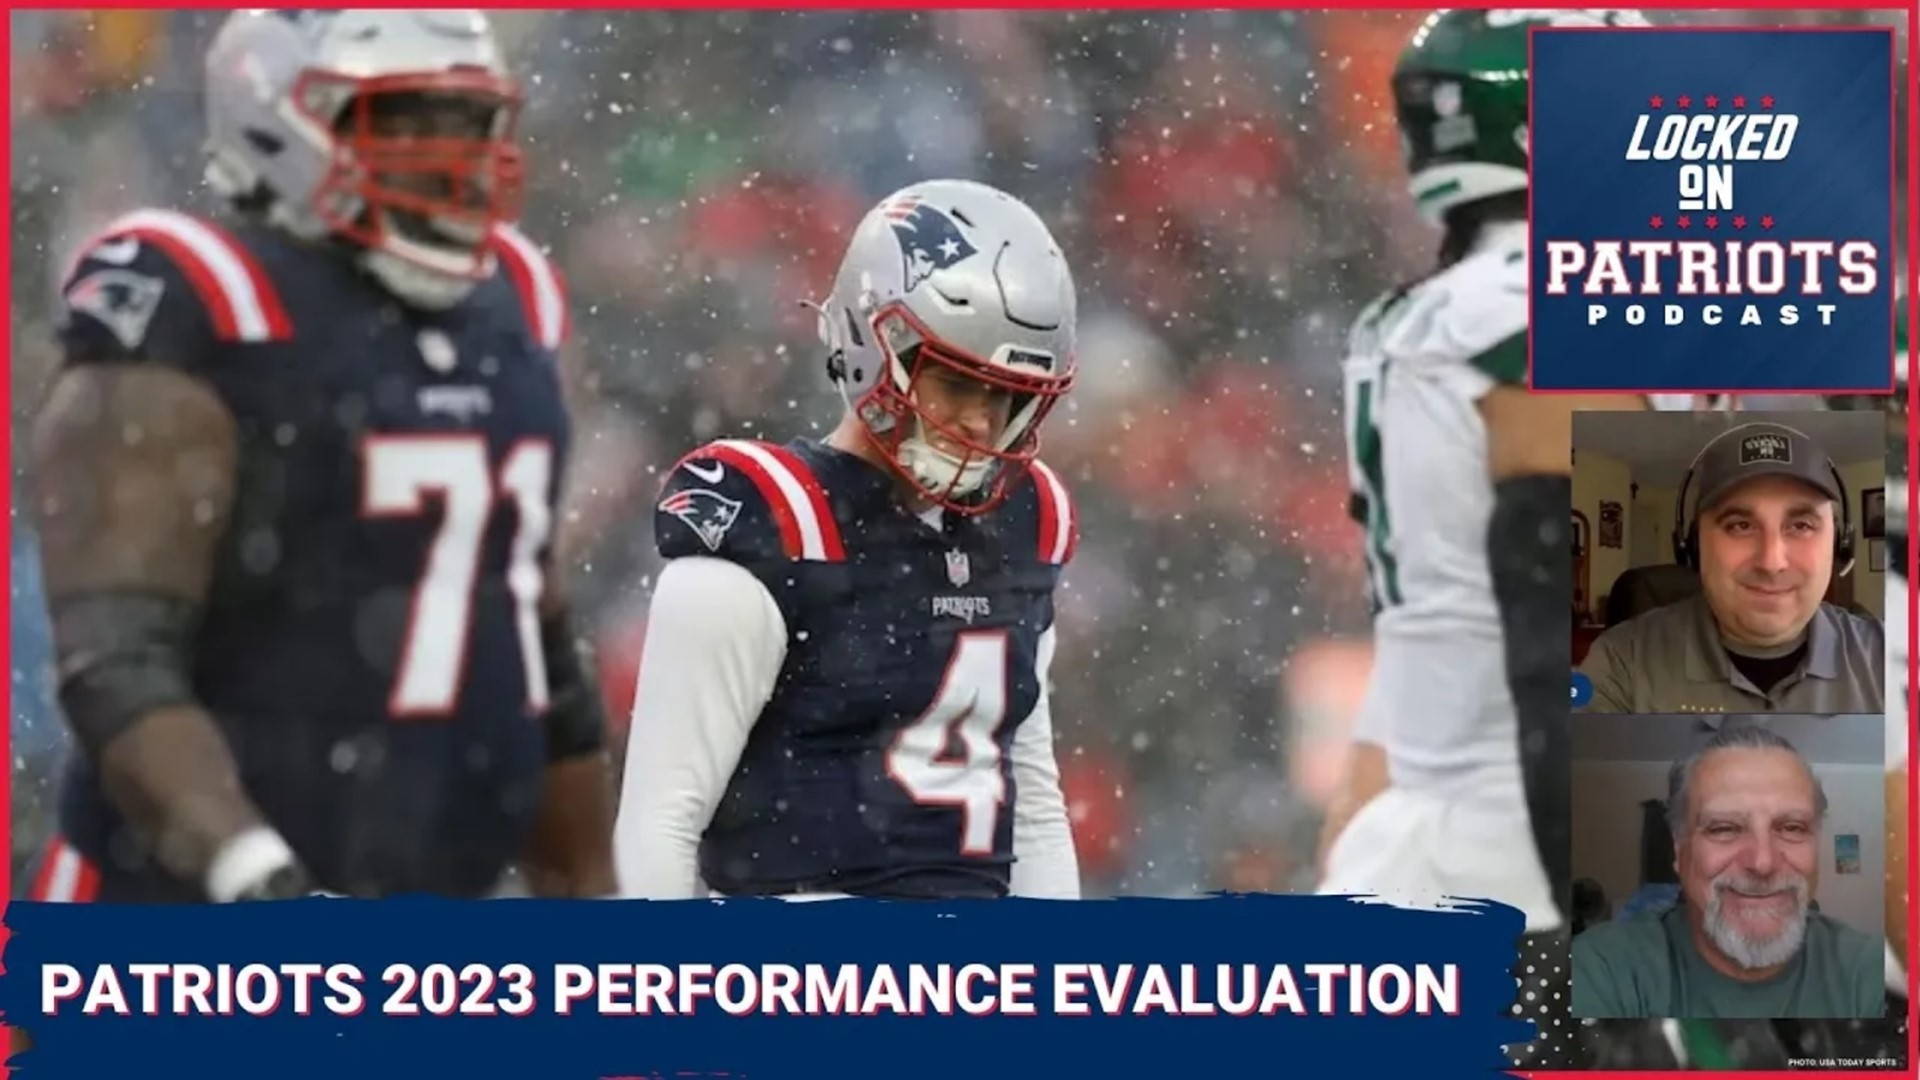 Despite a dismal 4-13 finish to their 2023 season, the New England Patriots did see some impressive performances by a handful of players.